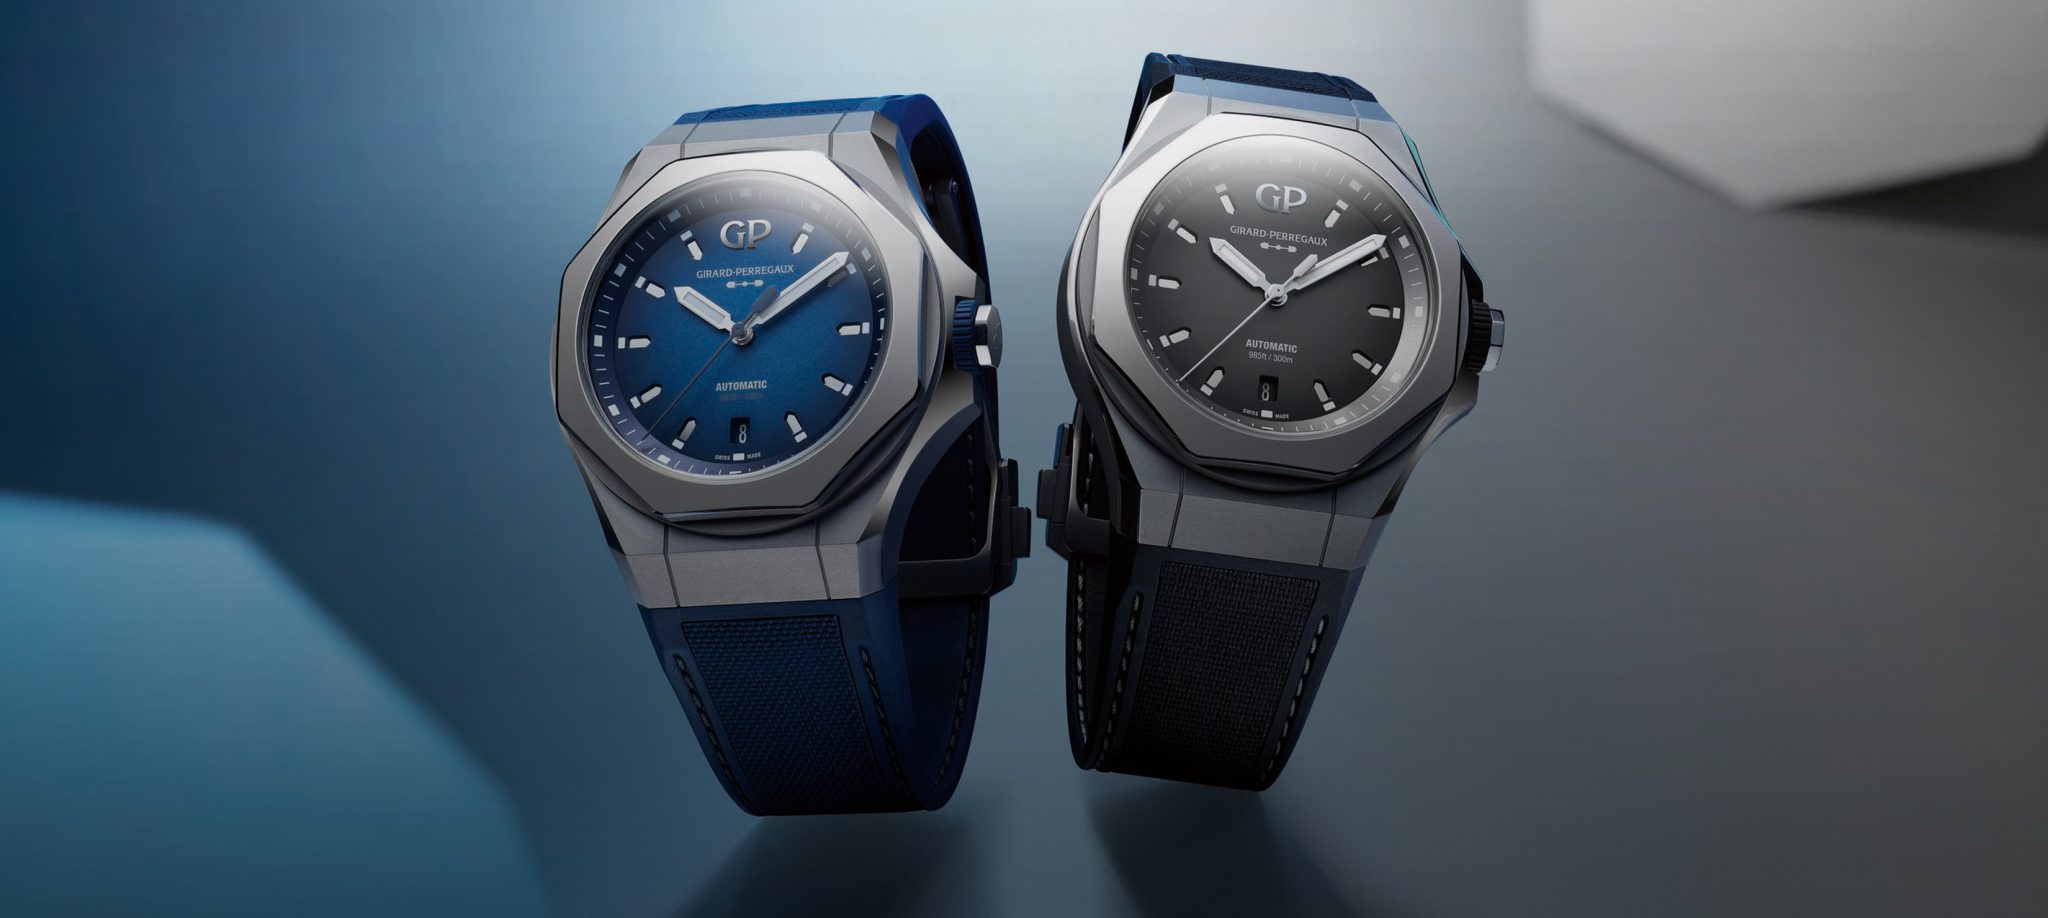 Girard-Perregaux marks 230 years with limited-edition titanium timepiece